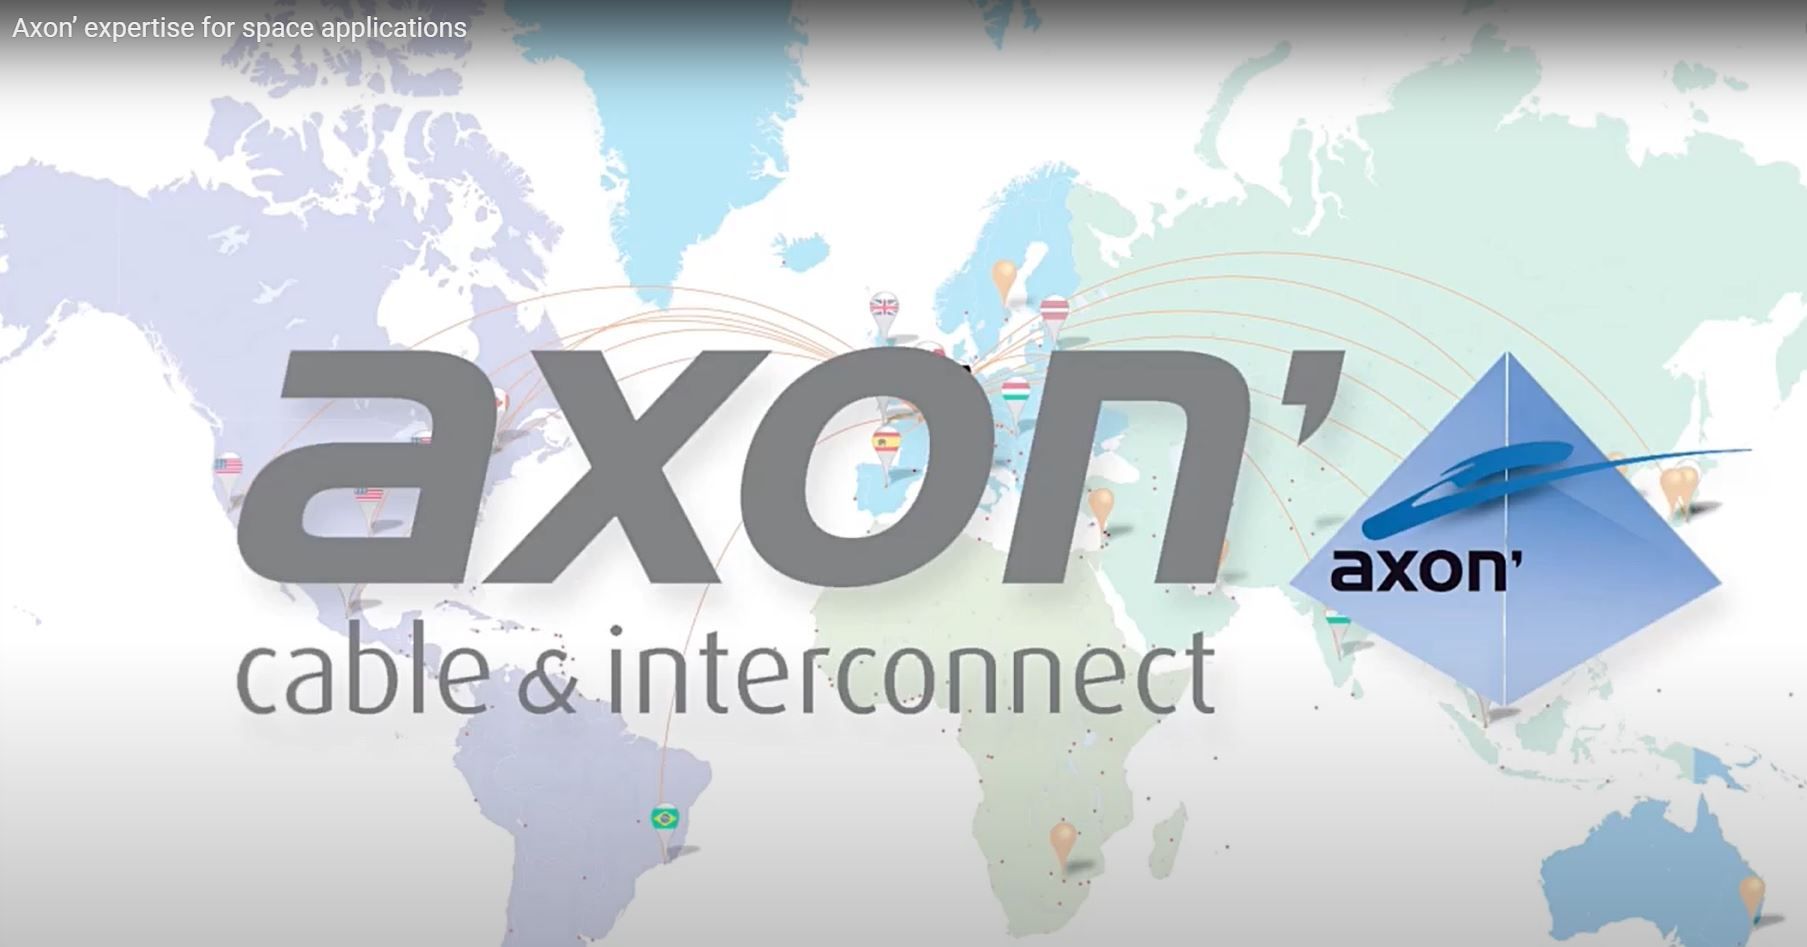 Axon expertise for space applications